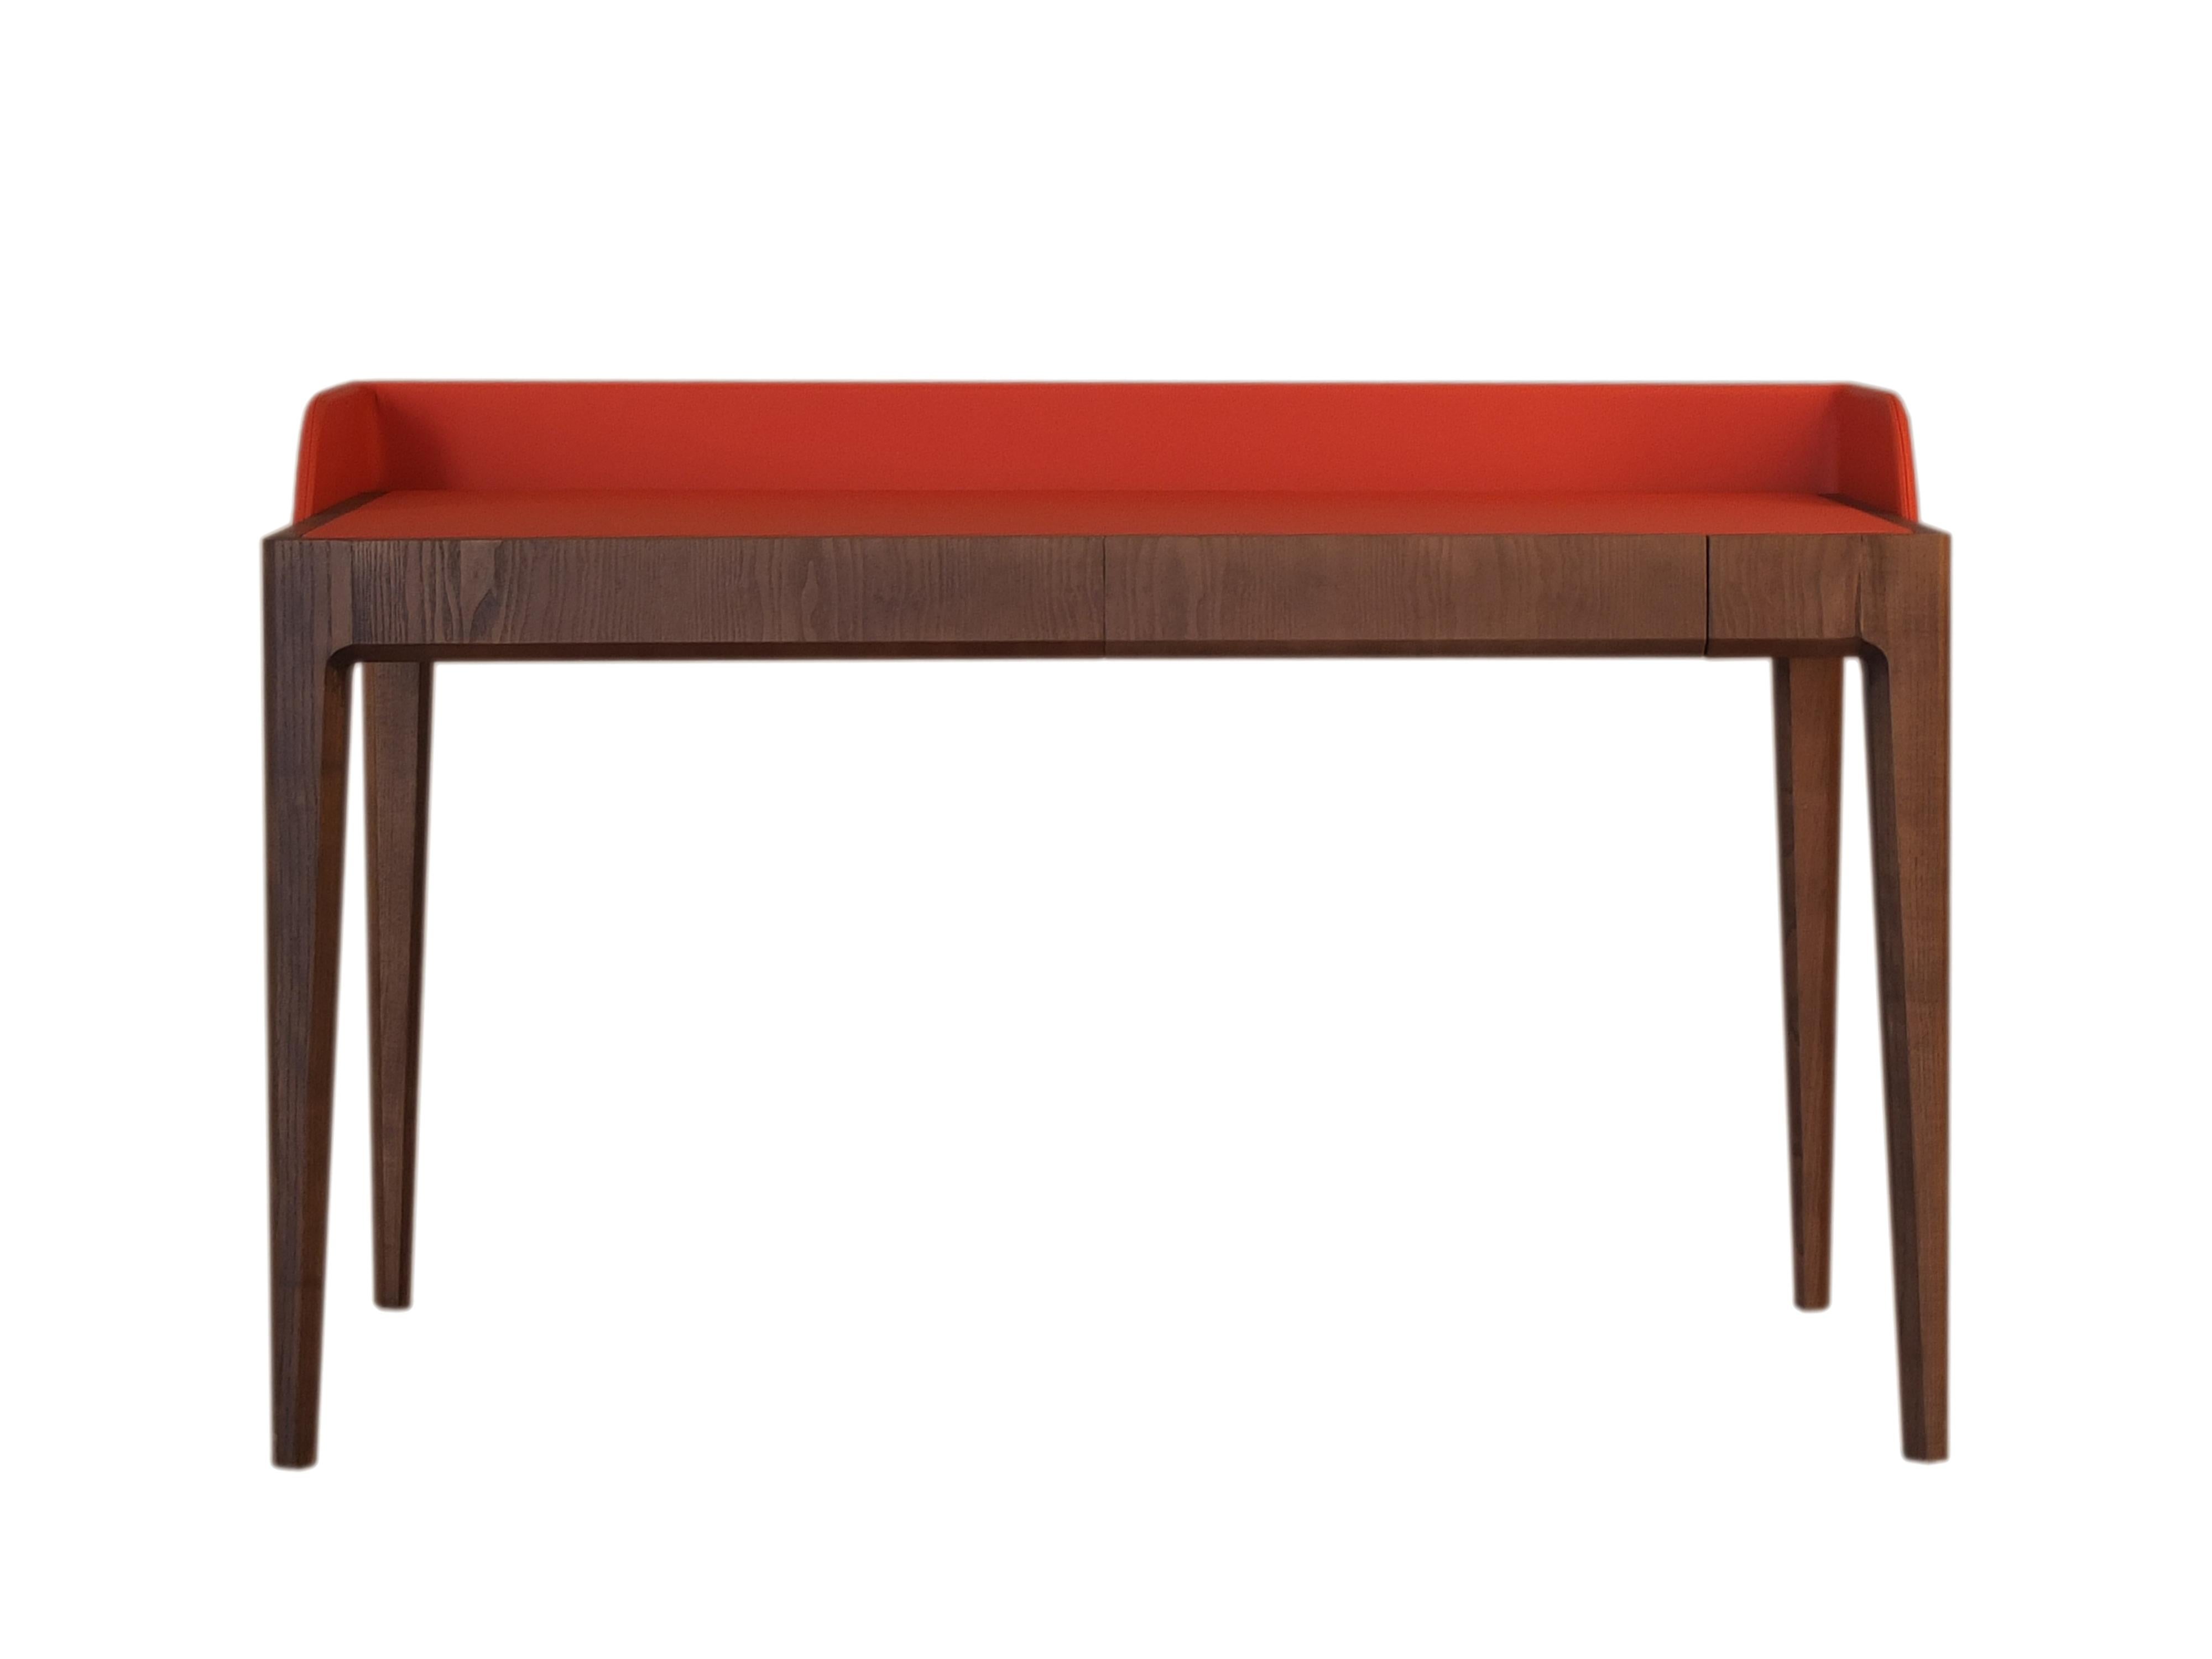 Italian Bellagio Desk by Morelato, made of Ashwood with Leather Flapping Top